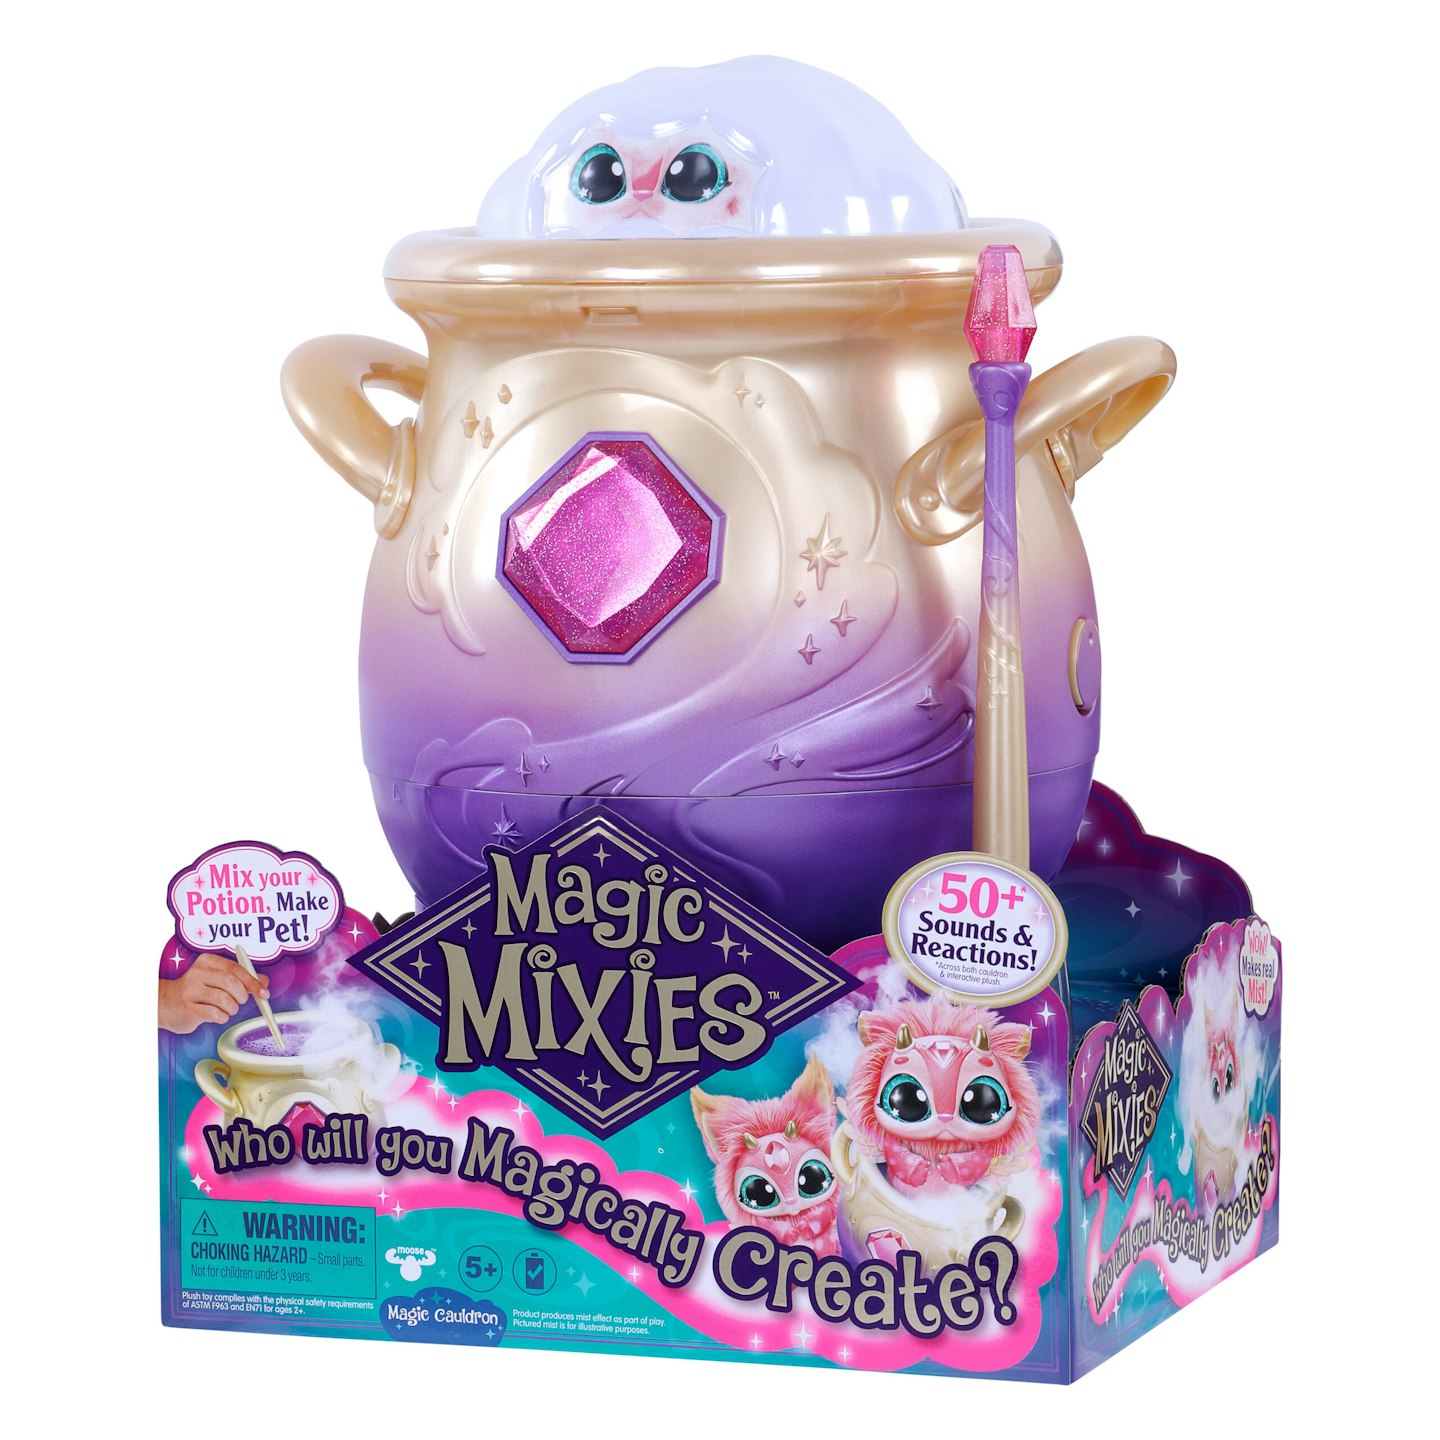 MAGIC MIXIES FROM MOOSE TOYS. RRP £69.99